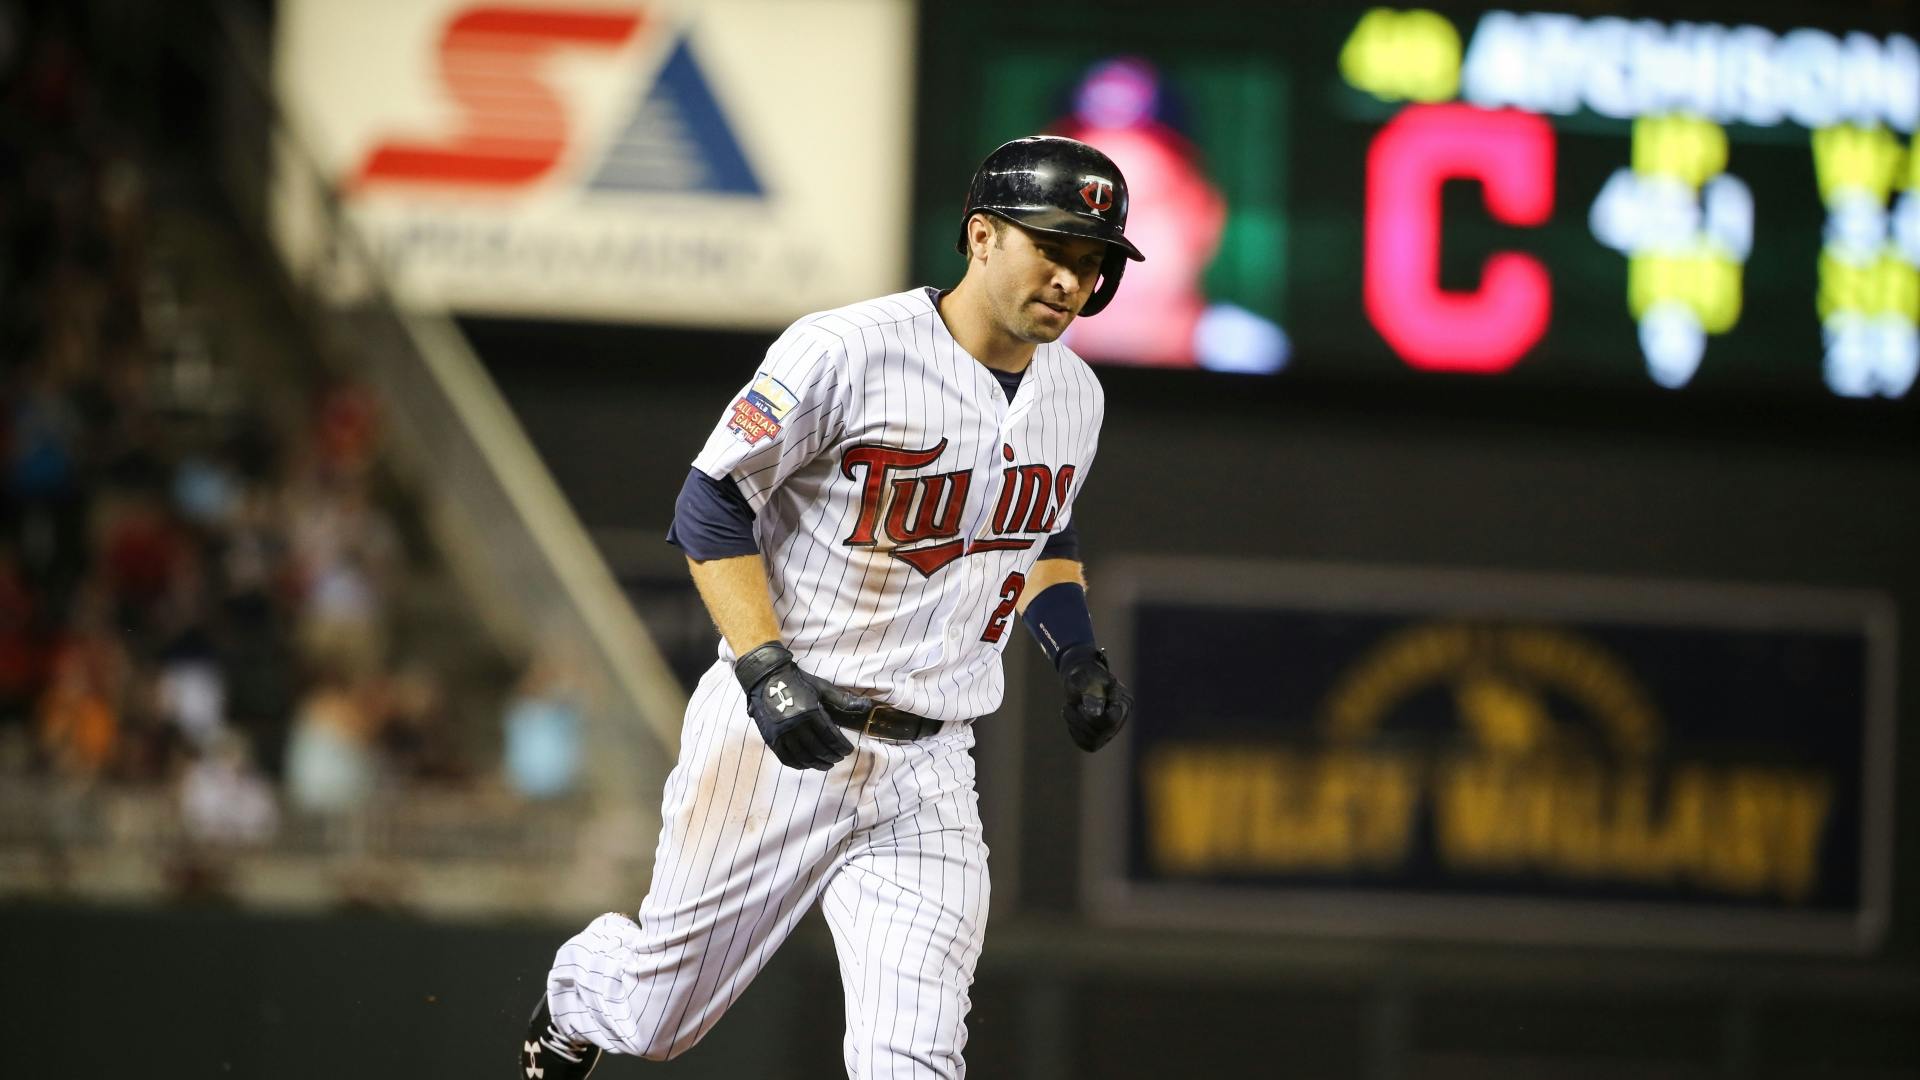 Twins second baseman Brian Dozier hit his 19th home run in the Twins' 8-2 loss to the Indians on Tuesday.